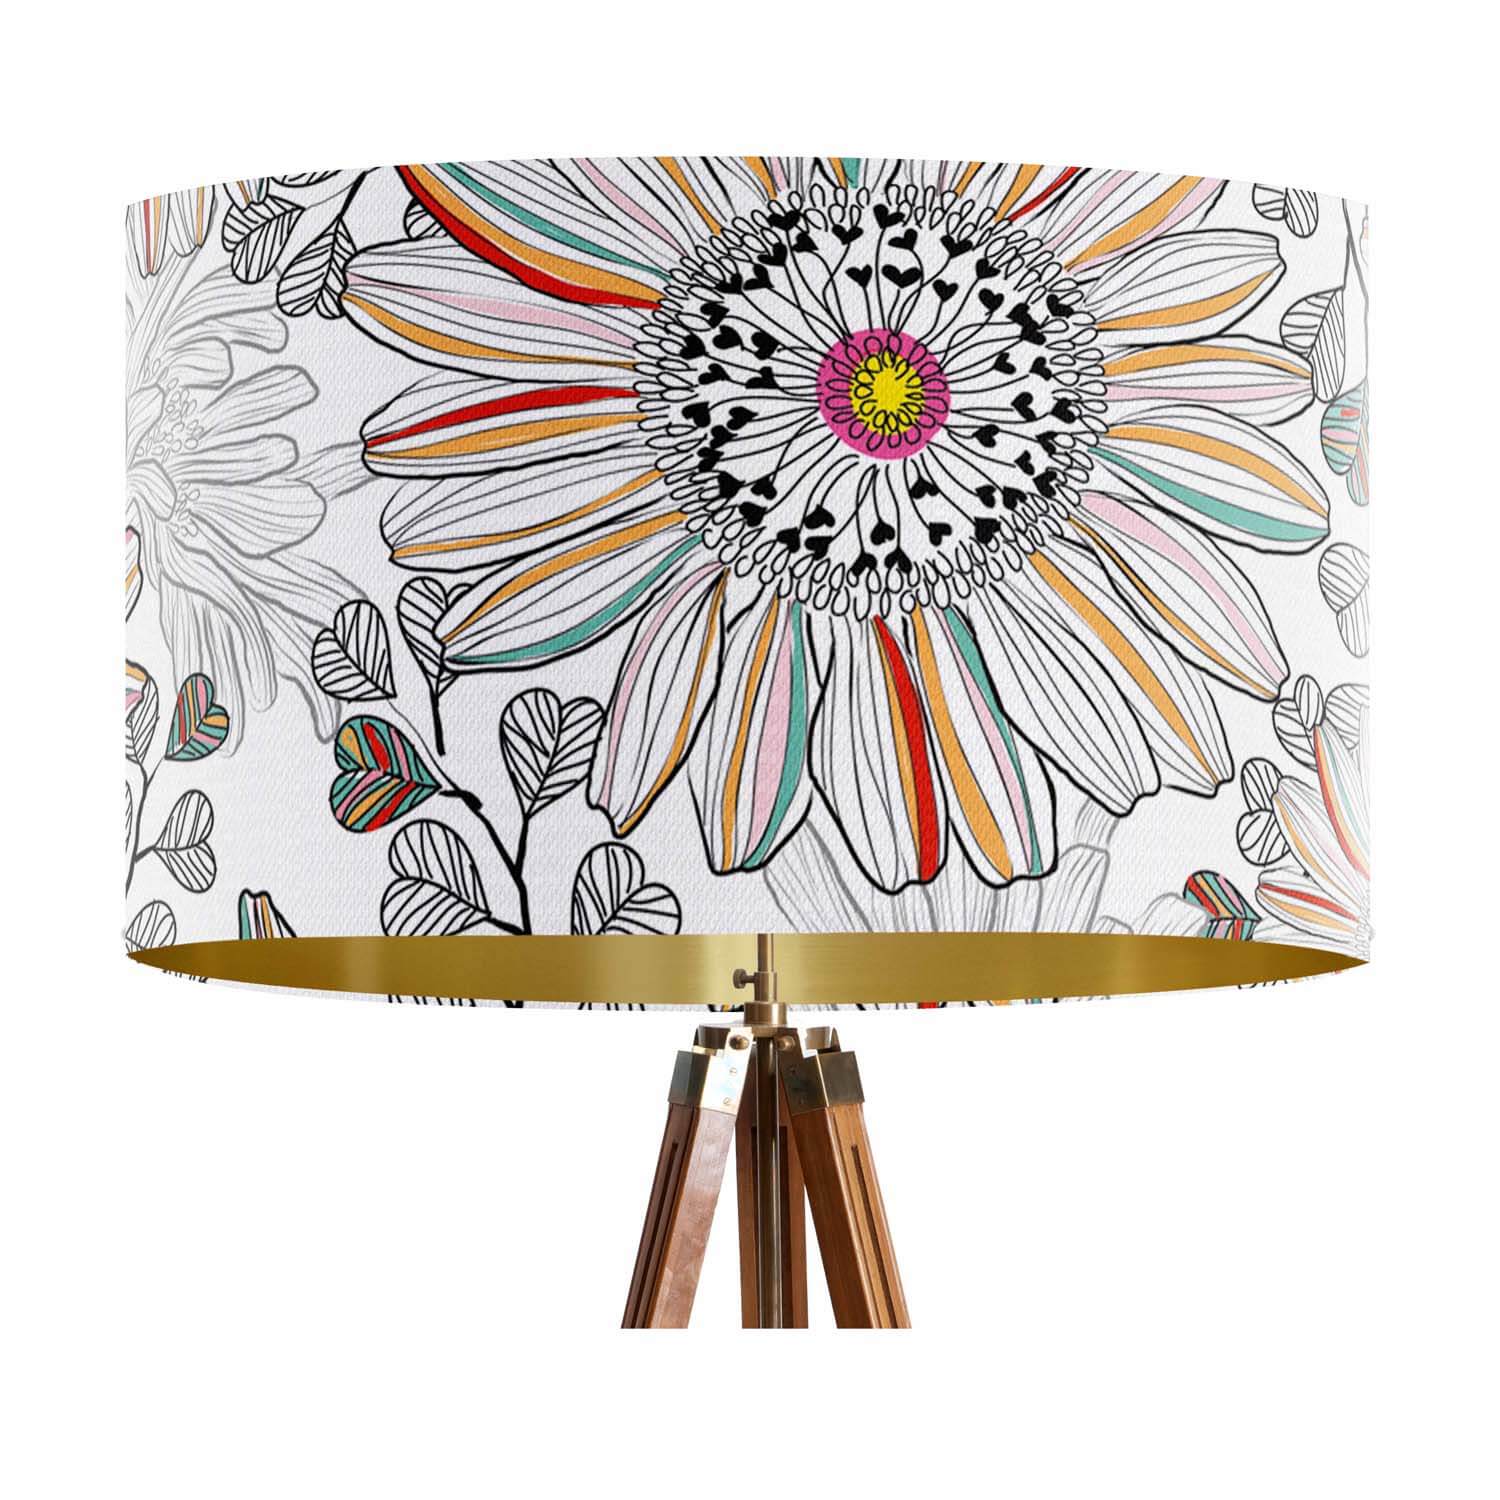 Passionflower (White) - Paradise Garden - House Of Turnowsky Lampshade